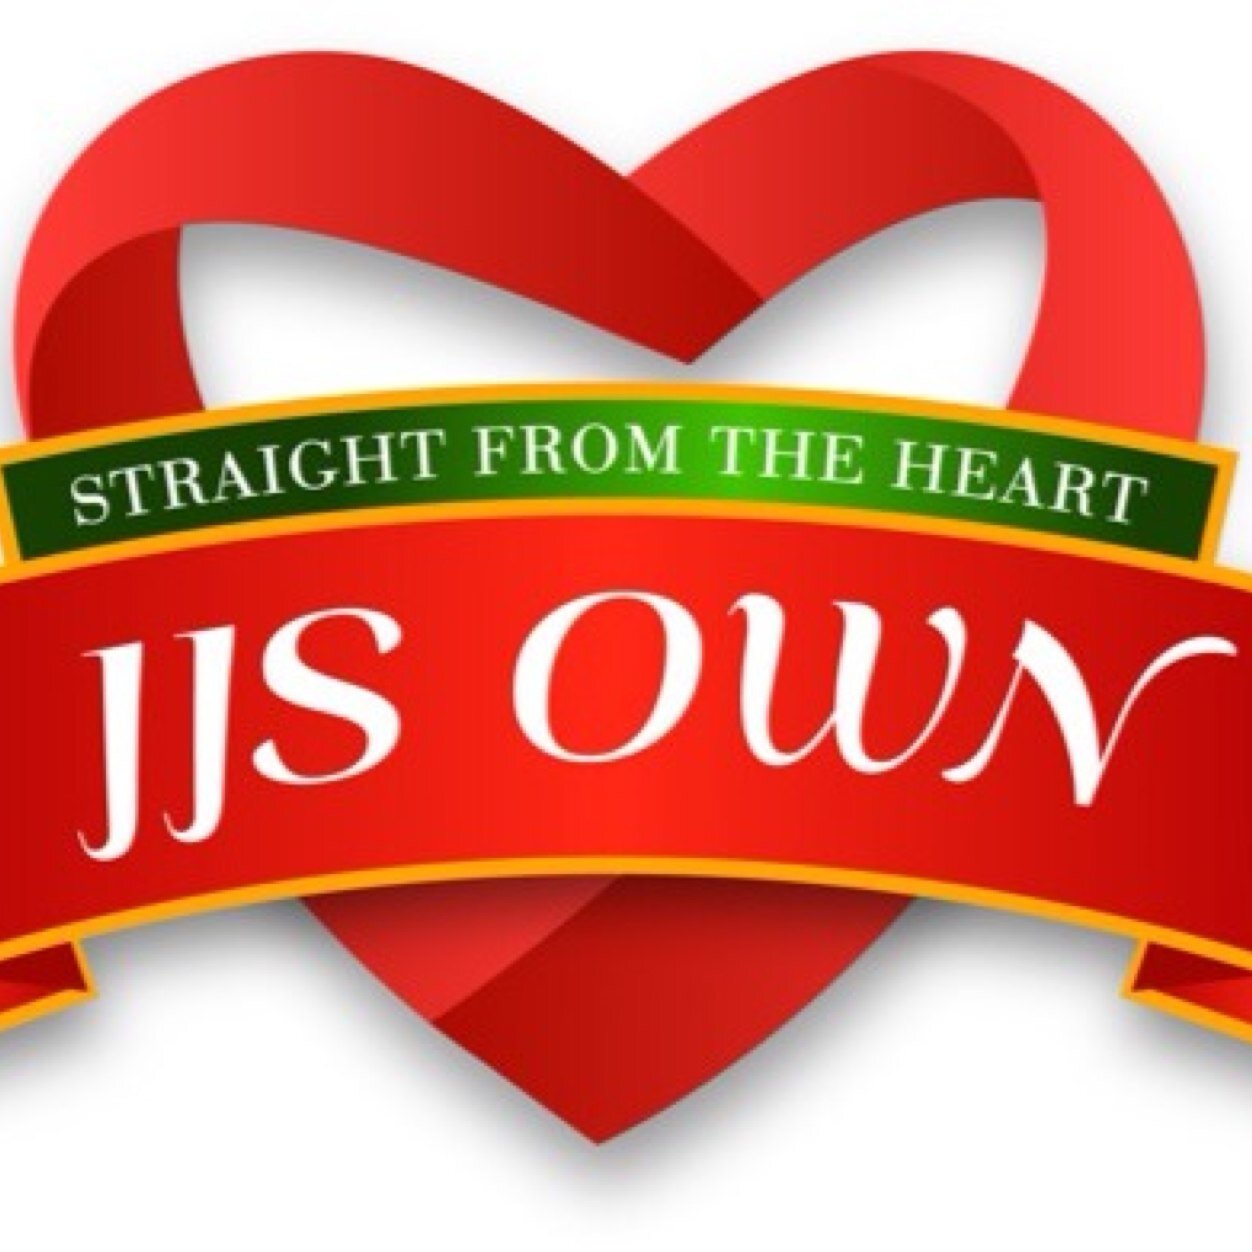 JJS OWN is a local company creating all nautral salad dressings & marinades that are guaranteed to satisfy any palate.